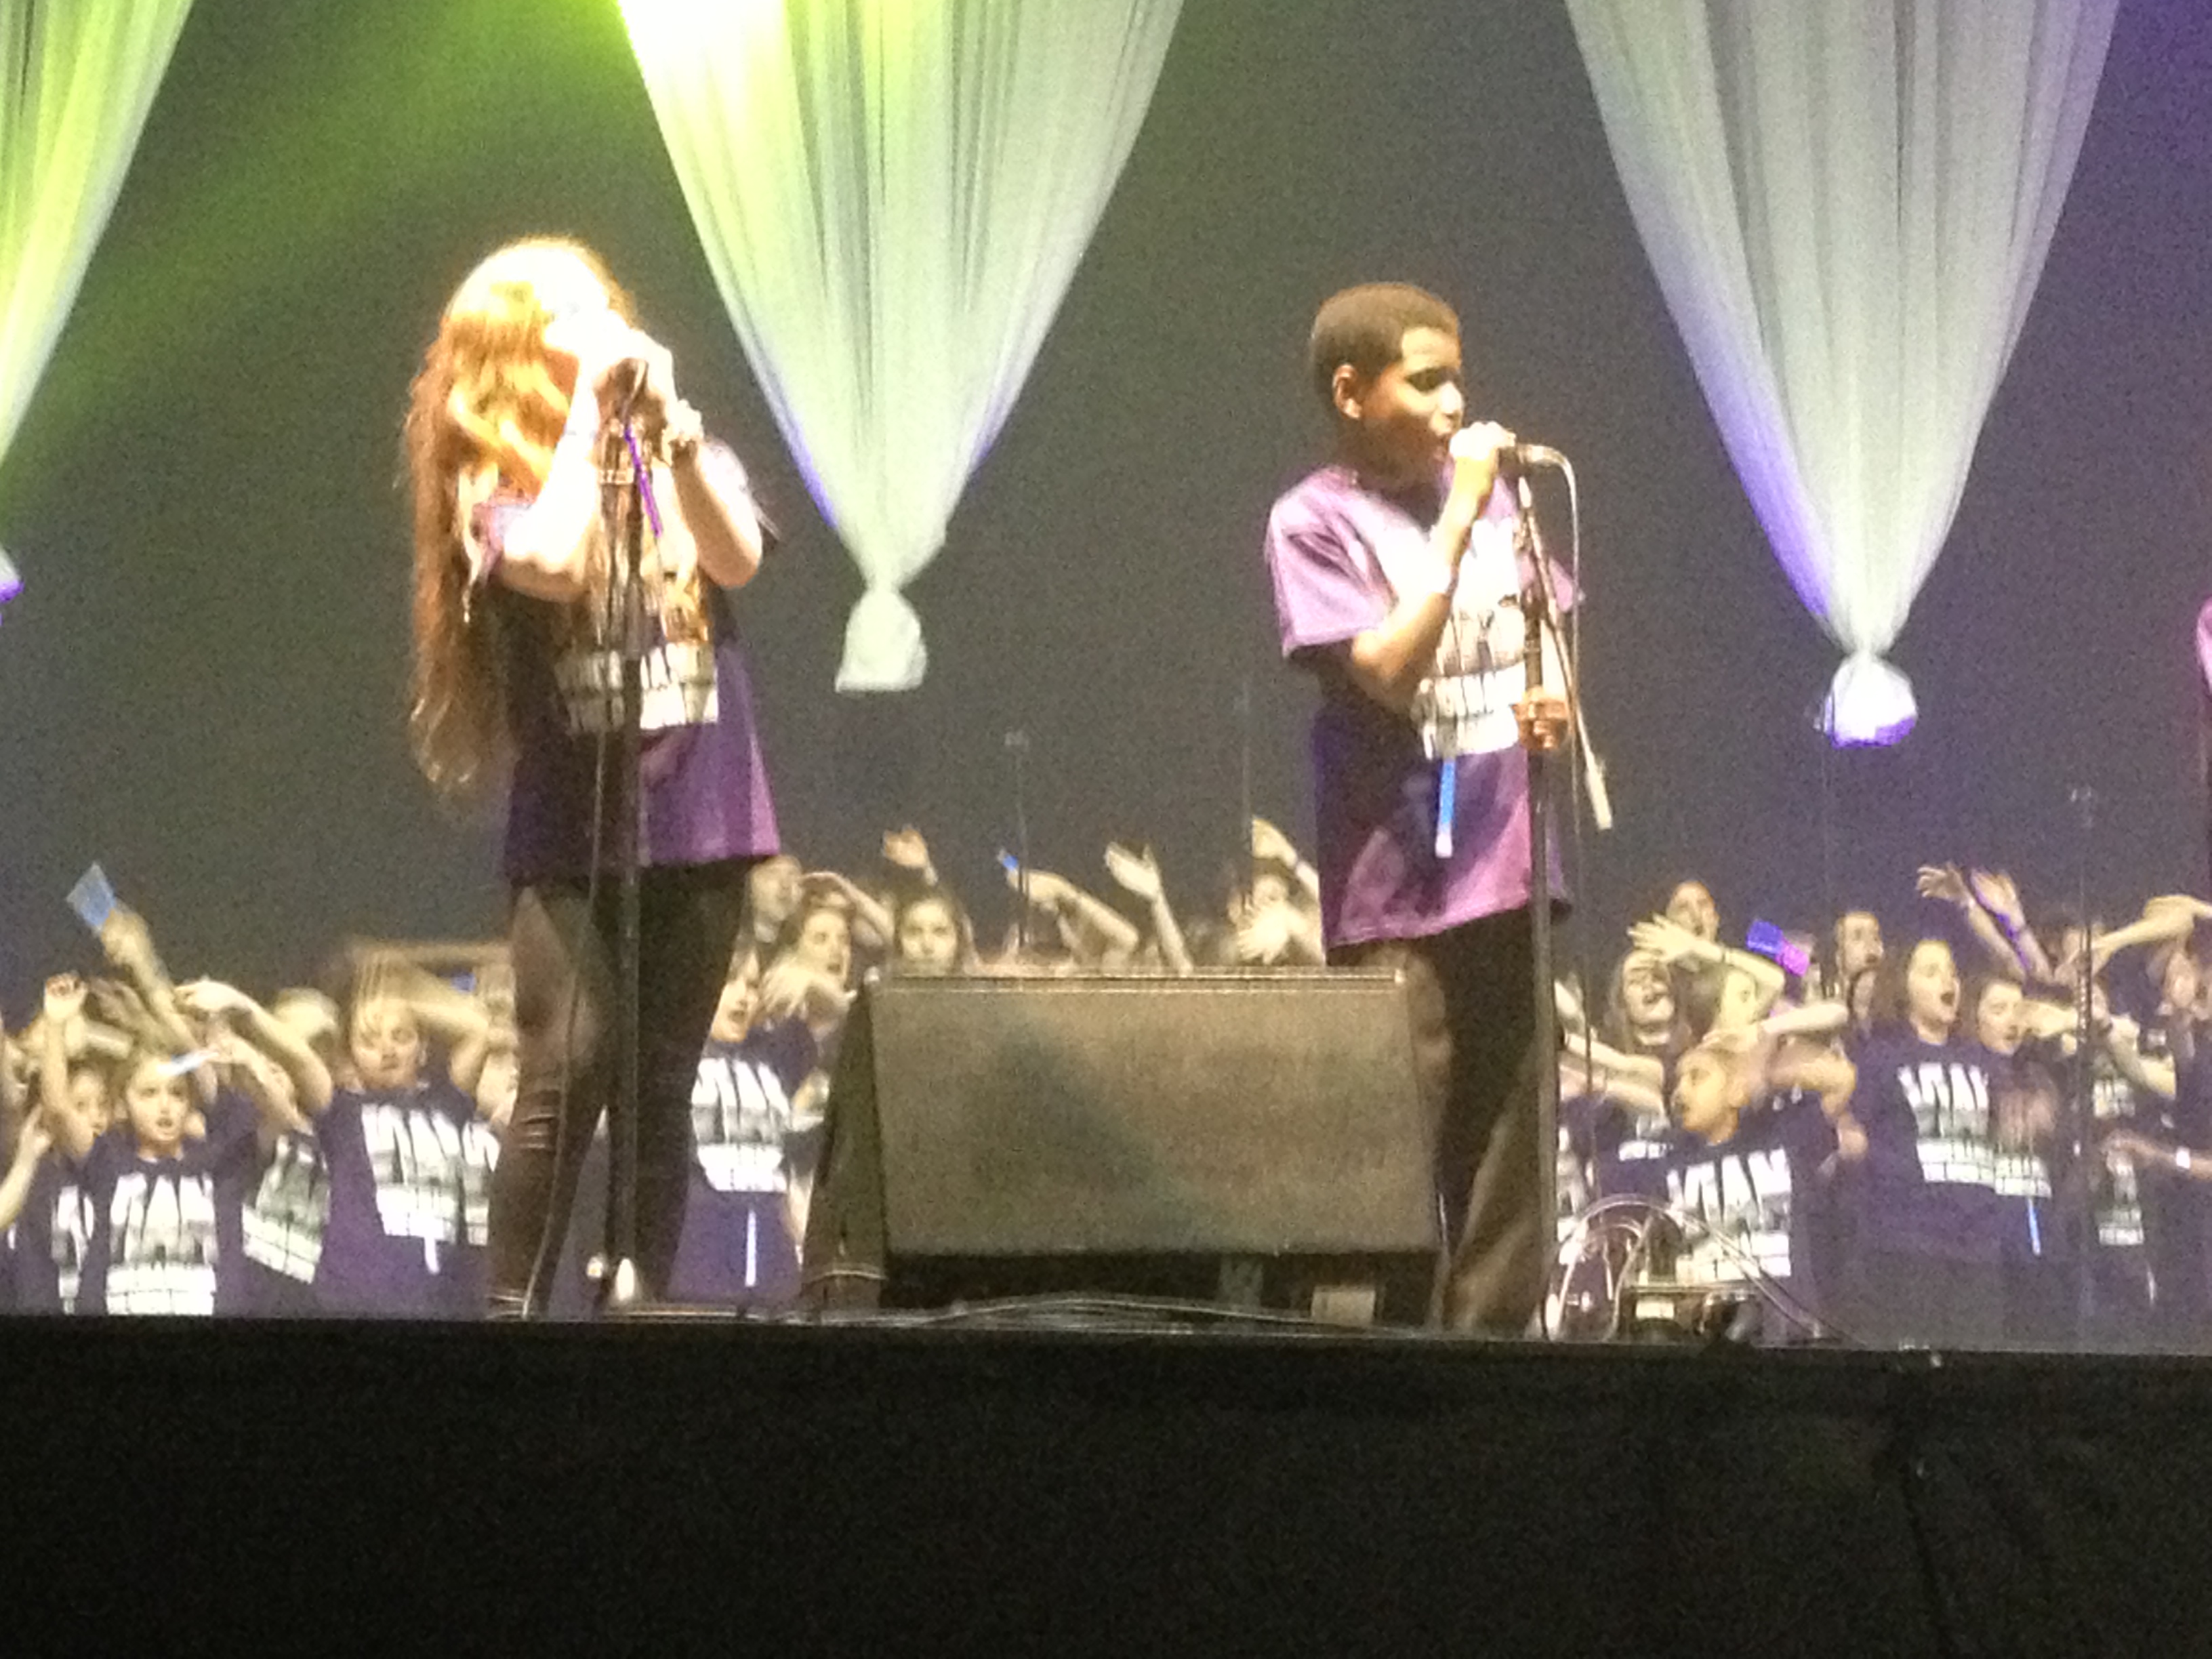 Singing at VOICE IN A MILLION, Wembley Arena, London, UK March 2013